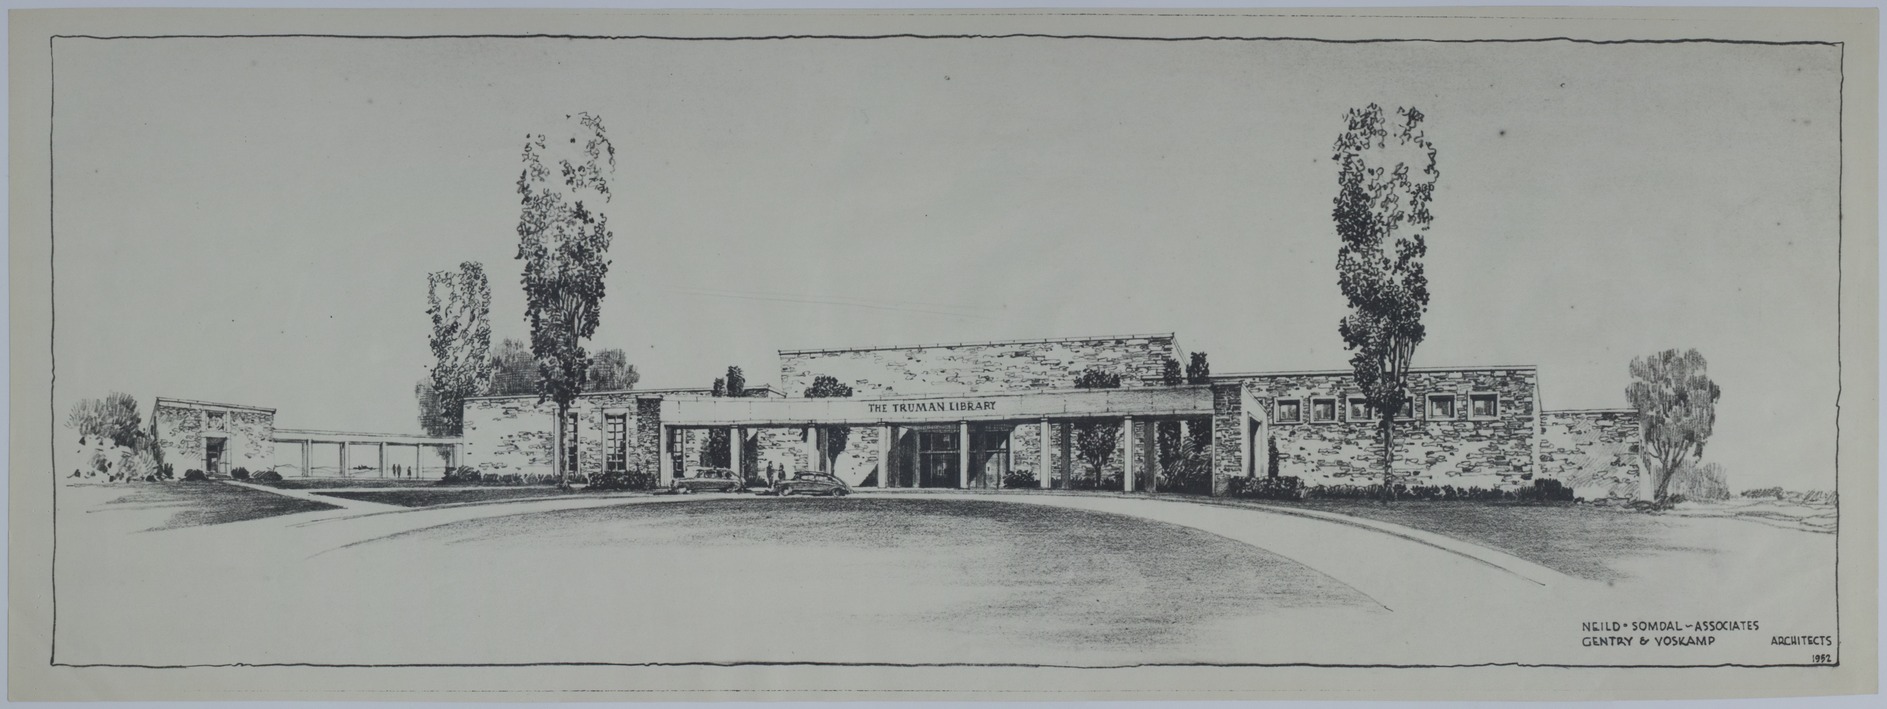 Drawing of the Proposed Front Entrance of the Harry S. Truman Library